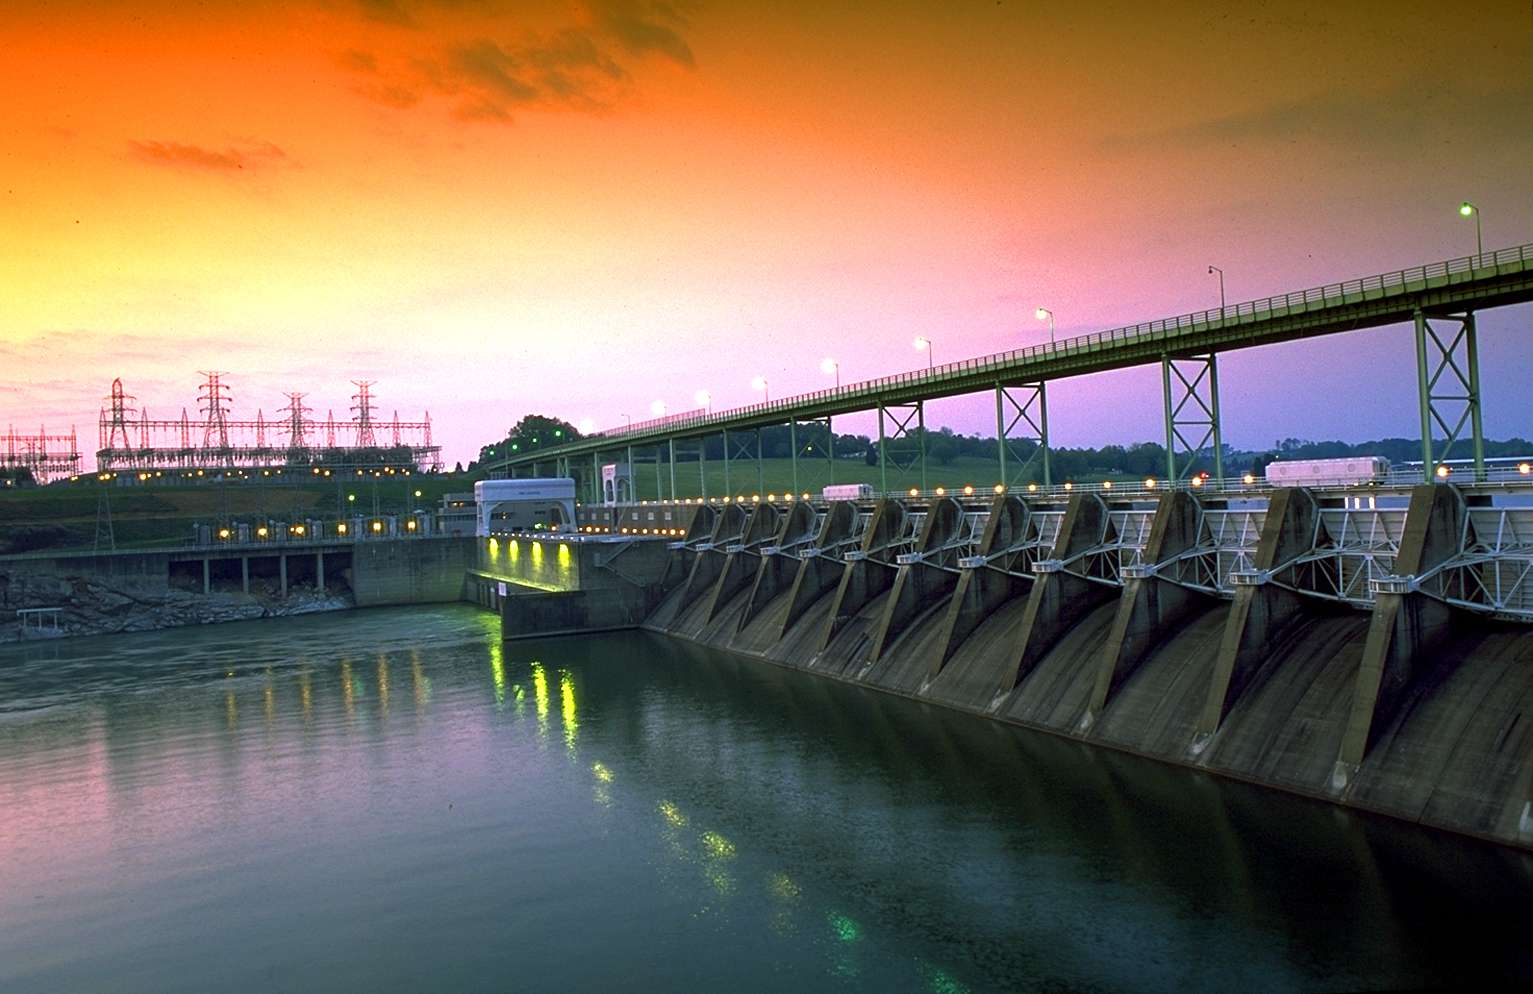 The Fort Loudon Dam on the Tennessee River will serve as one of the boundaries for Classic tournament waters. The dam was built by TVA in the early 1940s. 